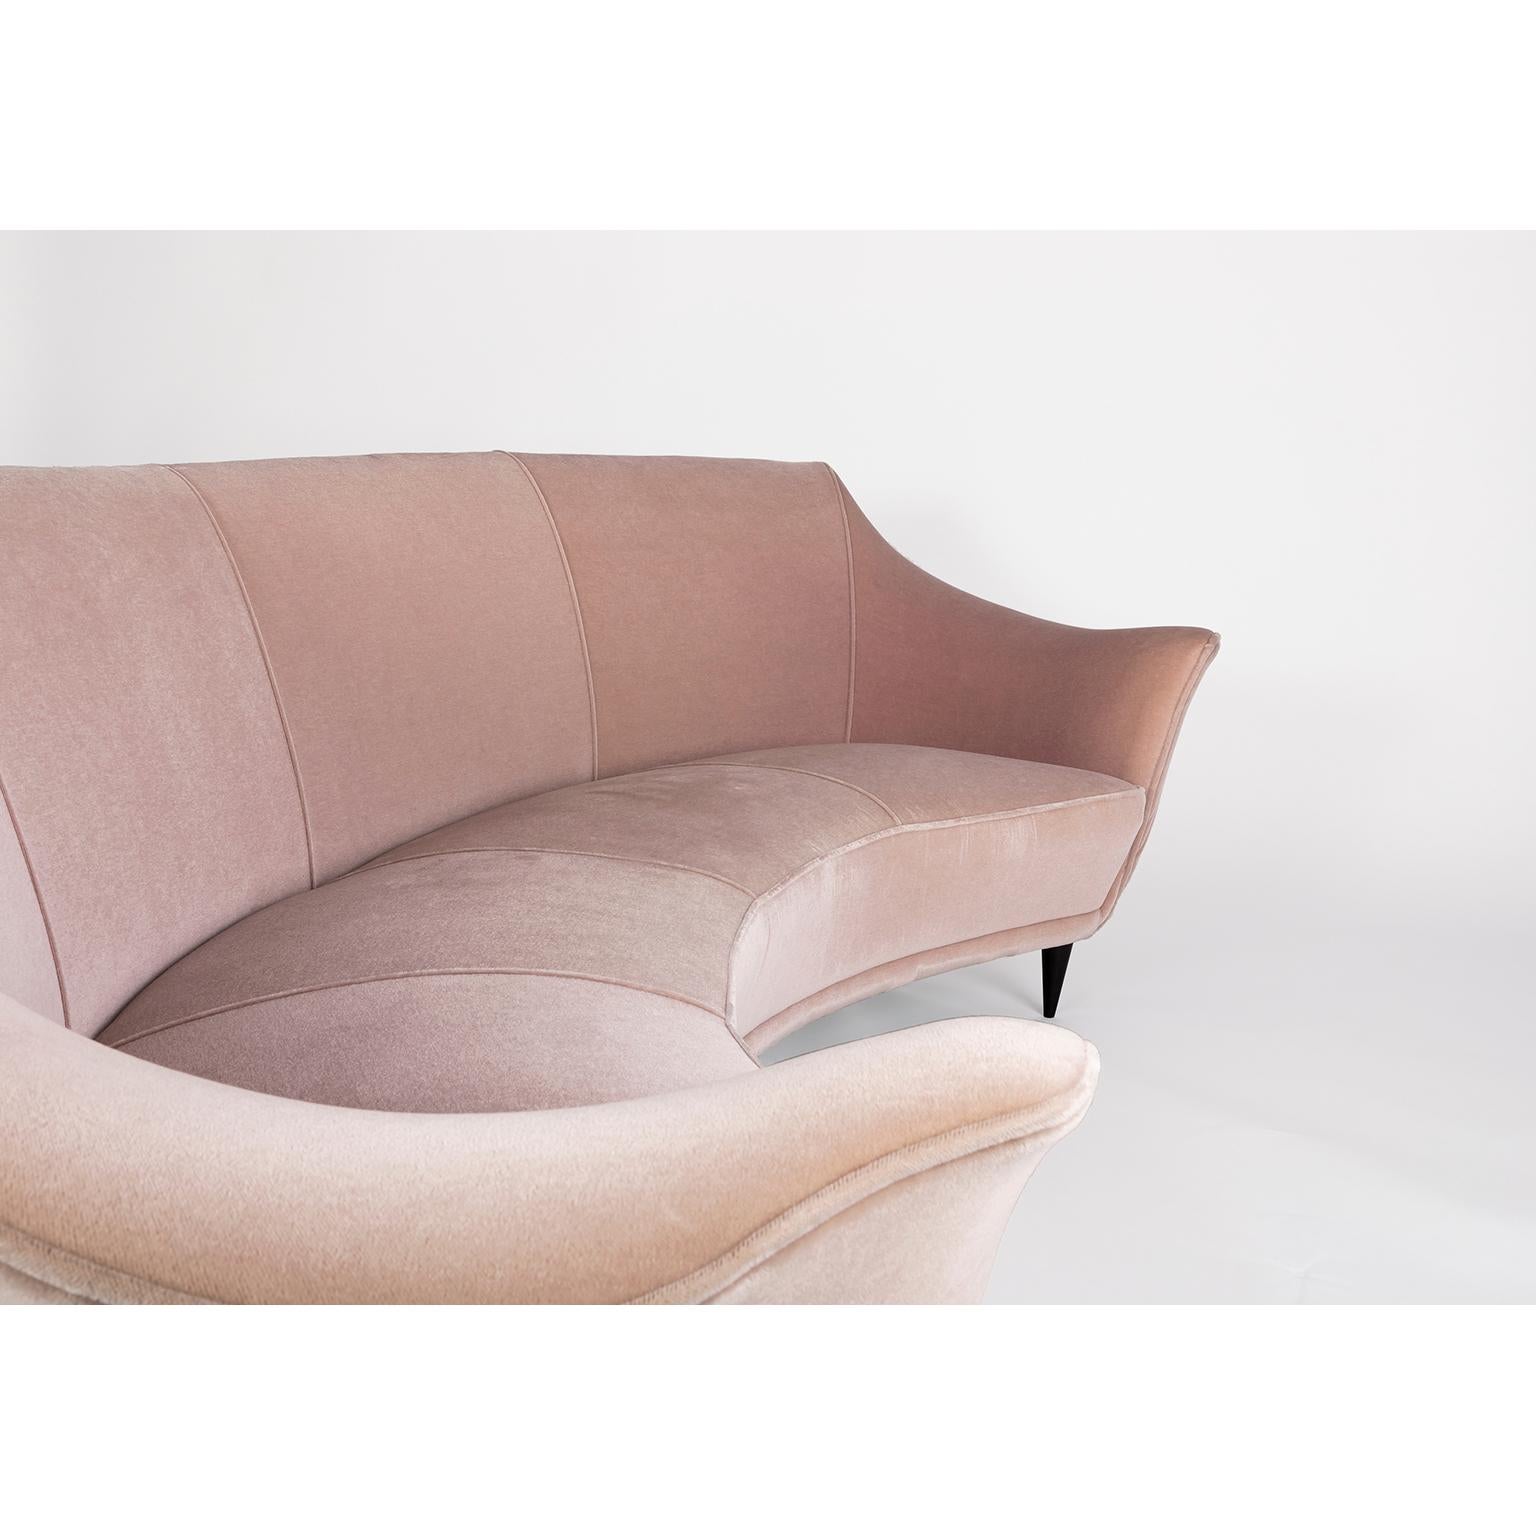 Mid-20th Century Ico Parisi Curved Four Seat Sofa, Italy, 1951 For Sale